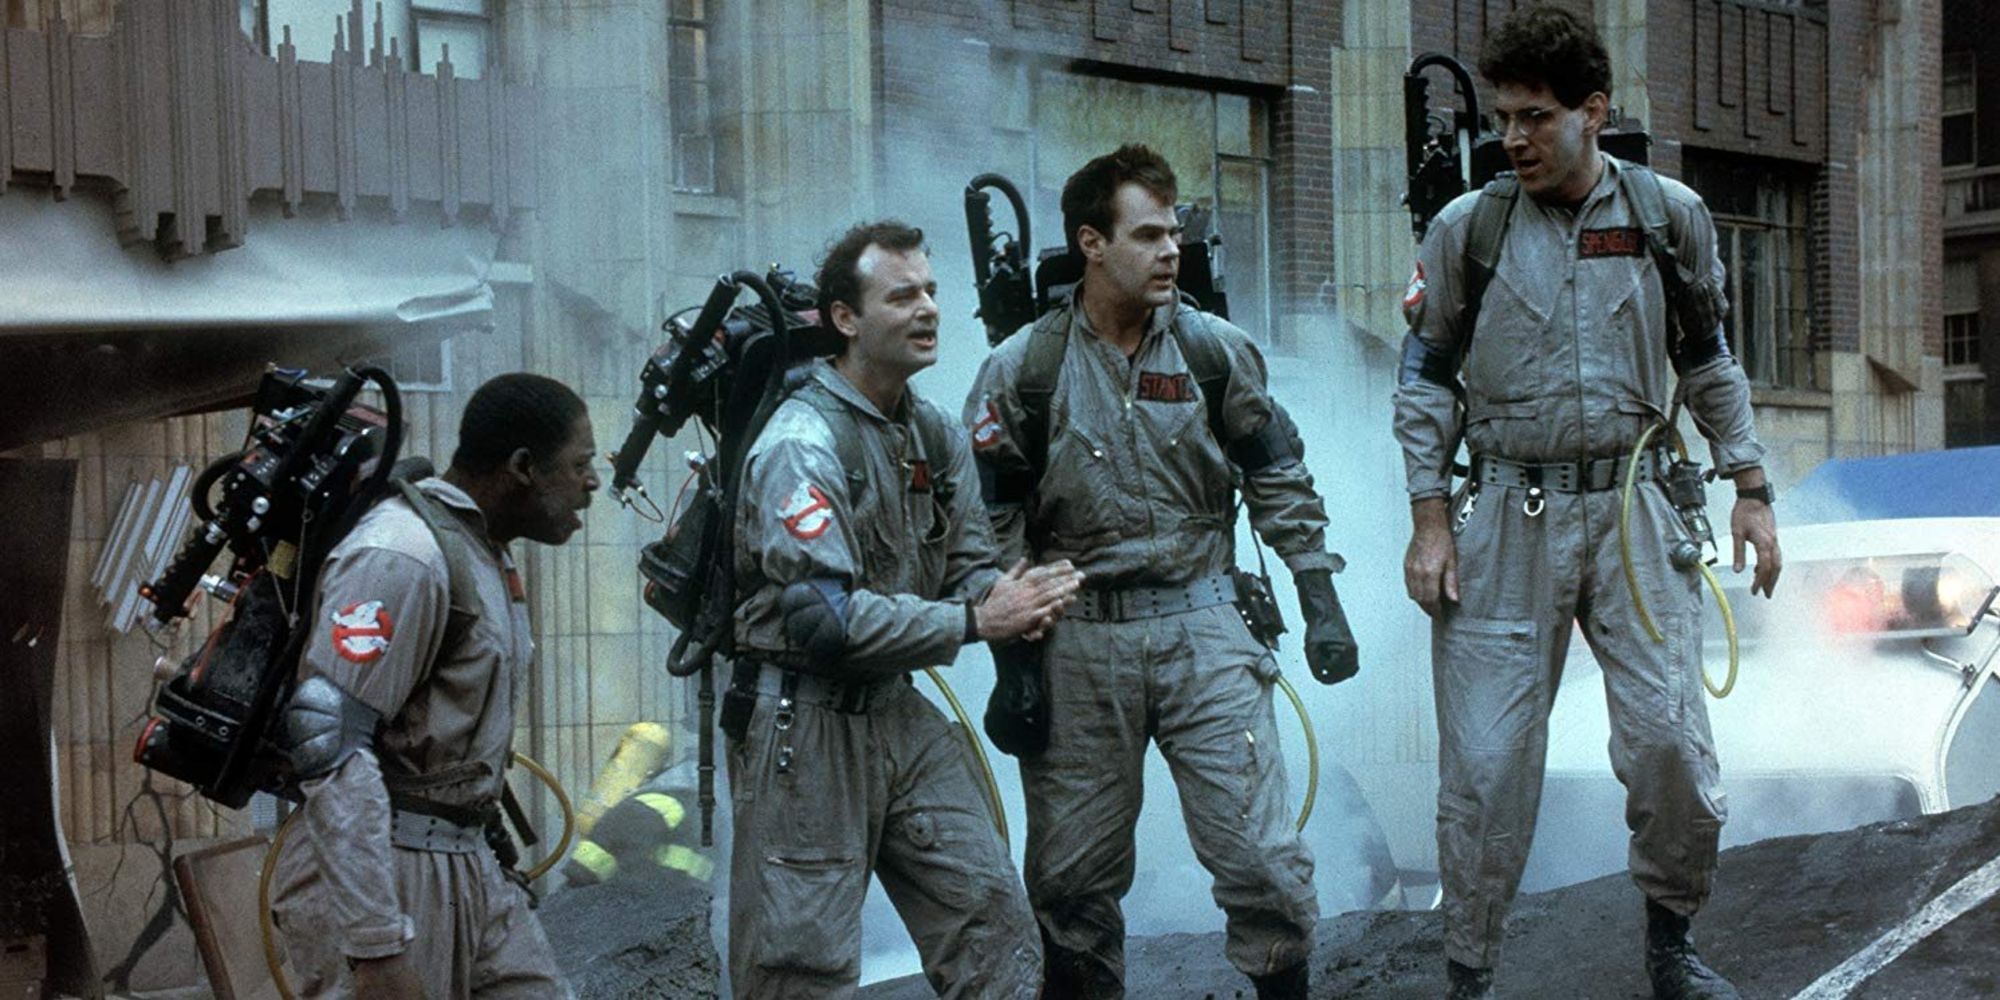 An image of all four Ghostbusters standing in a line holding their weapons in the Ghostbuster movie